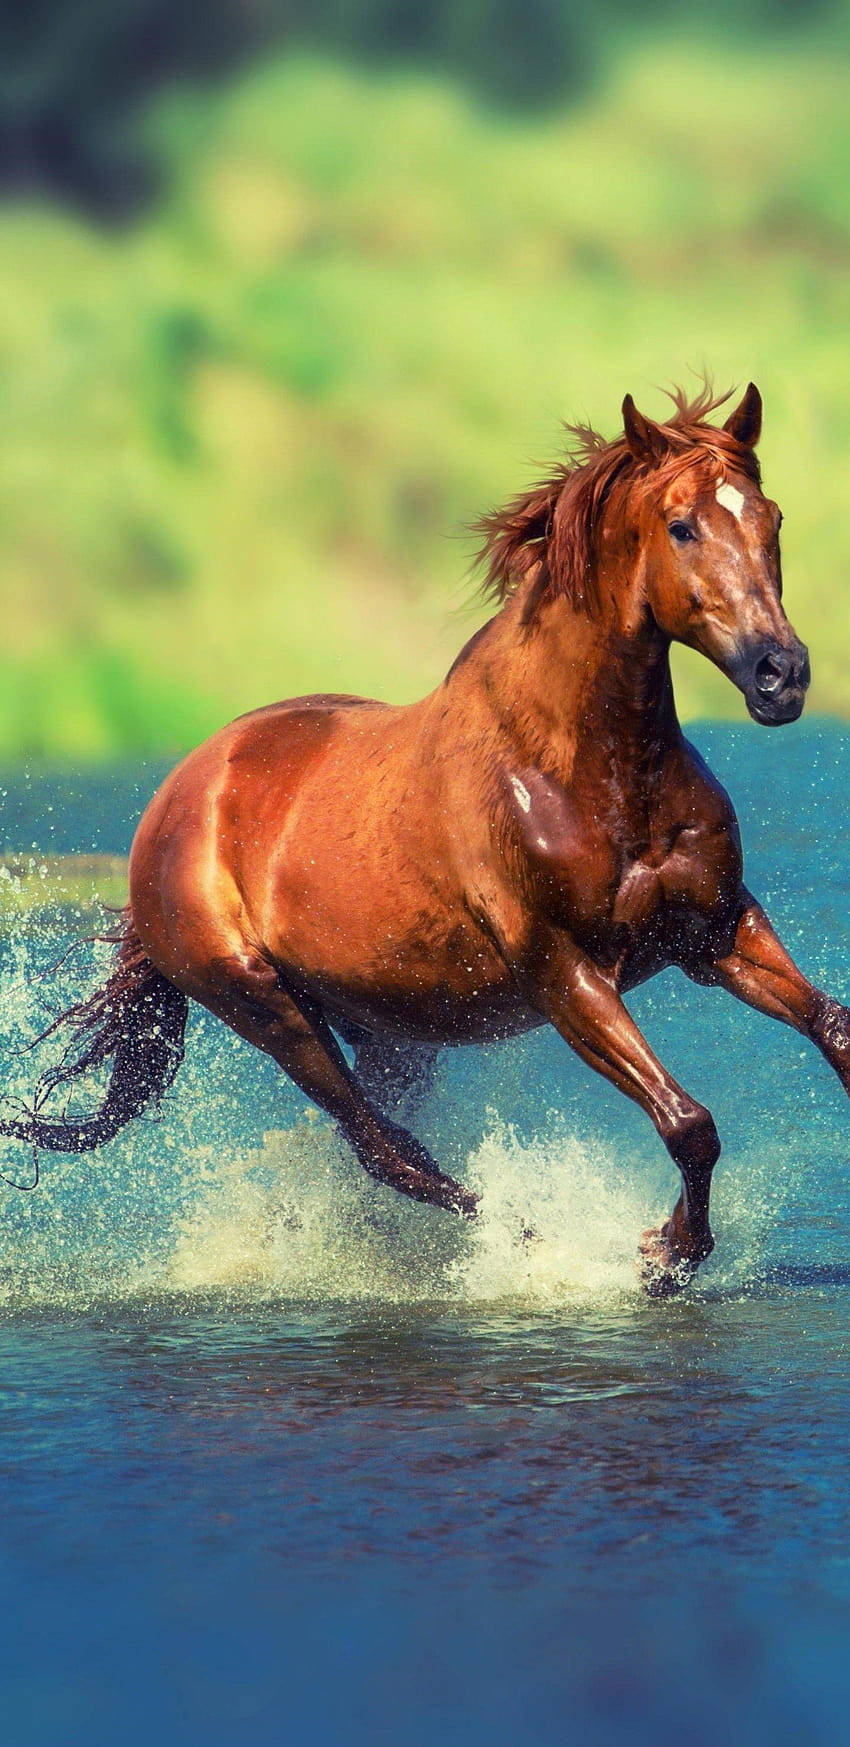 1440x2960 Running Horse In Water Samsung Galaxy Note 9,8, S9,S8,S HD phone wallpaper